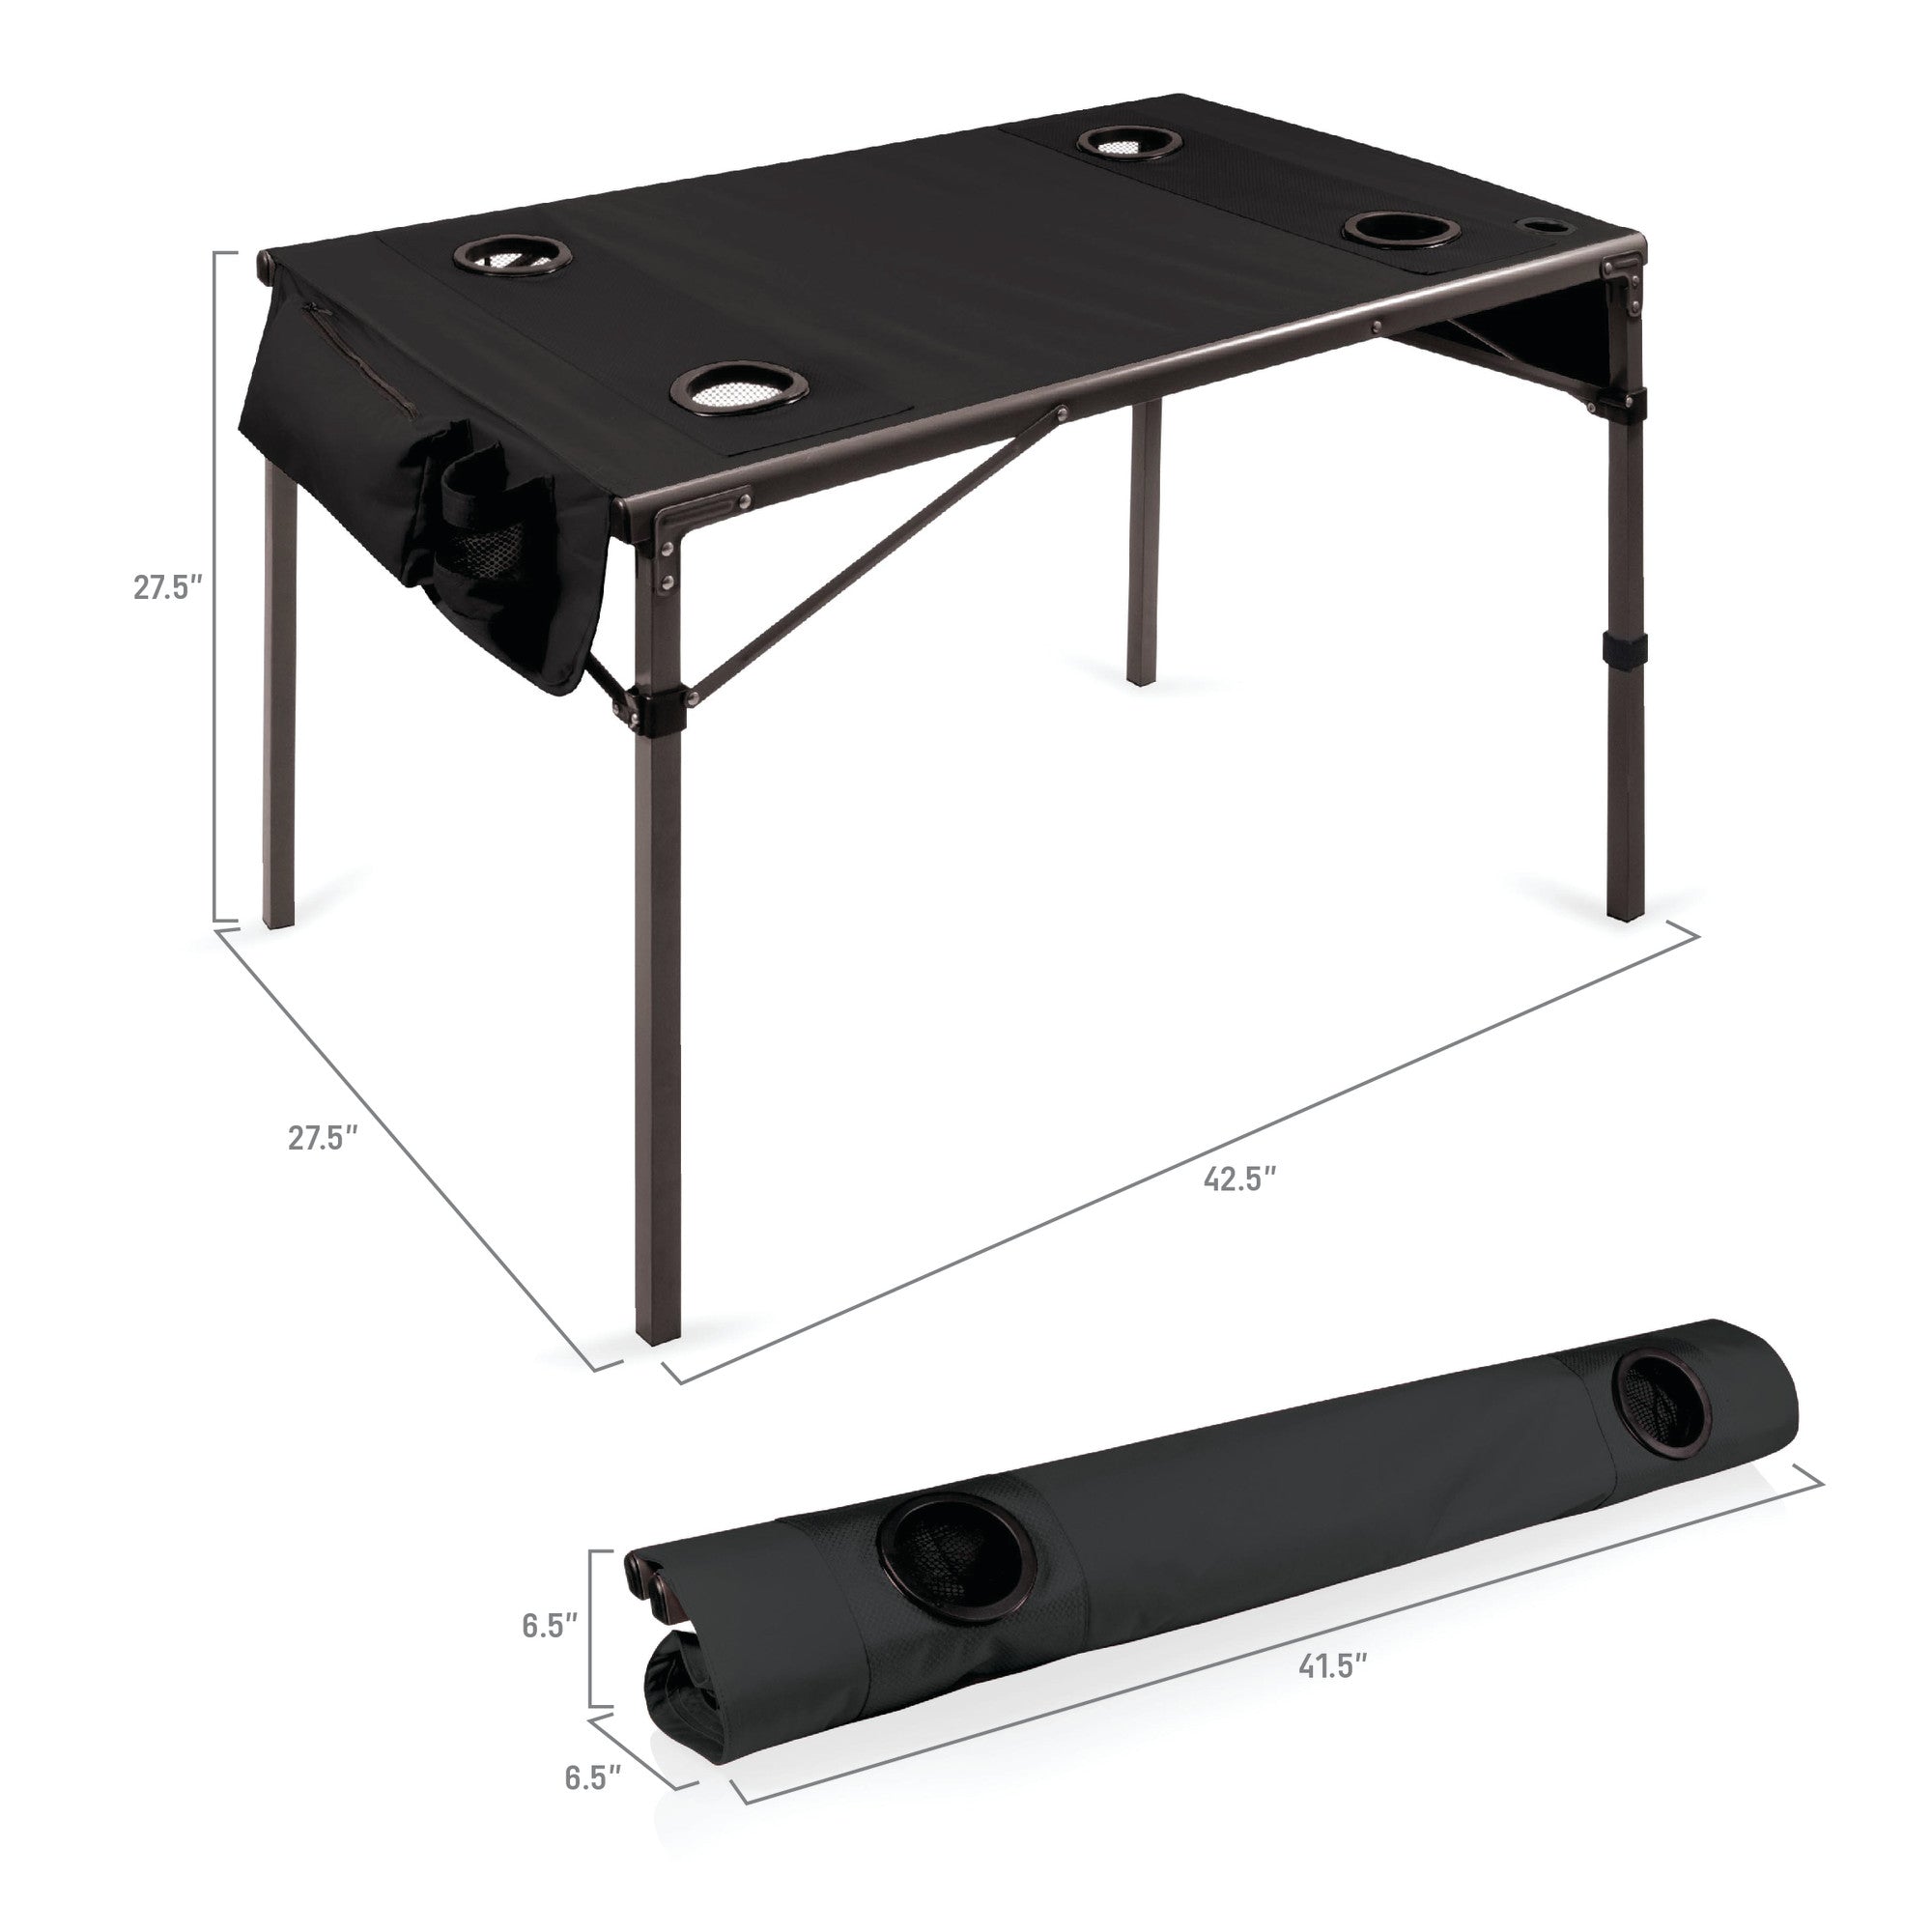 Cleveland Browns - Travel Table Portable Folding Table